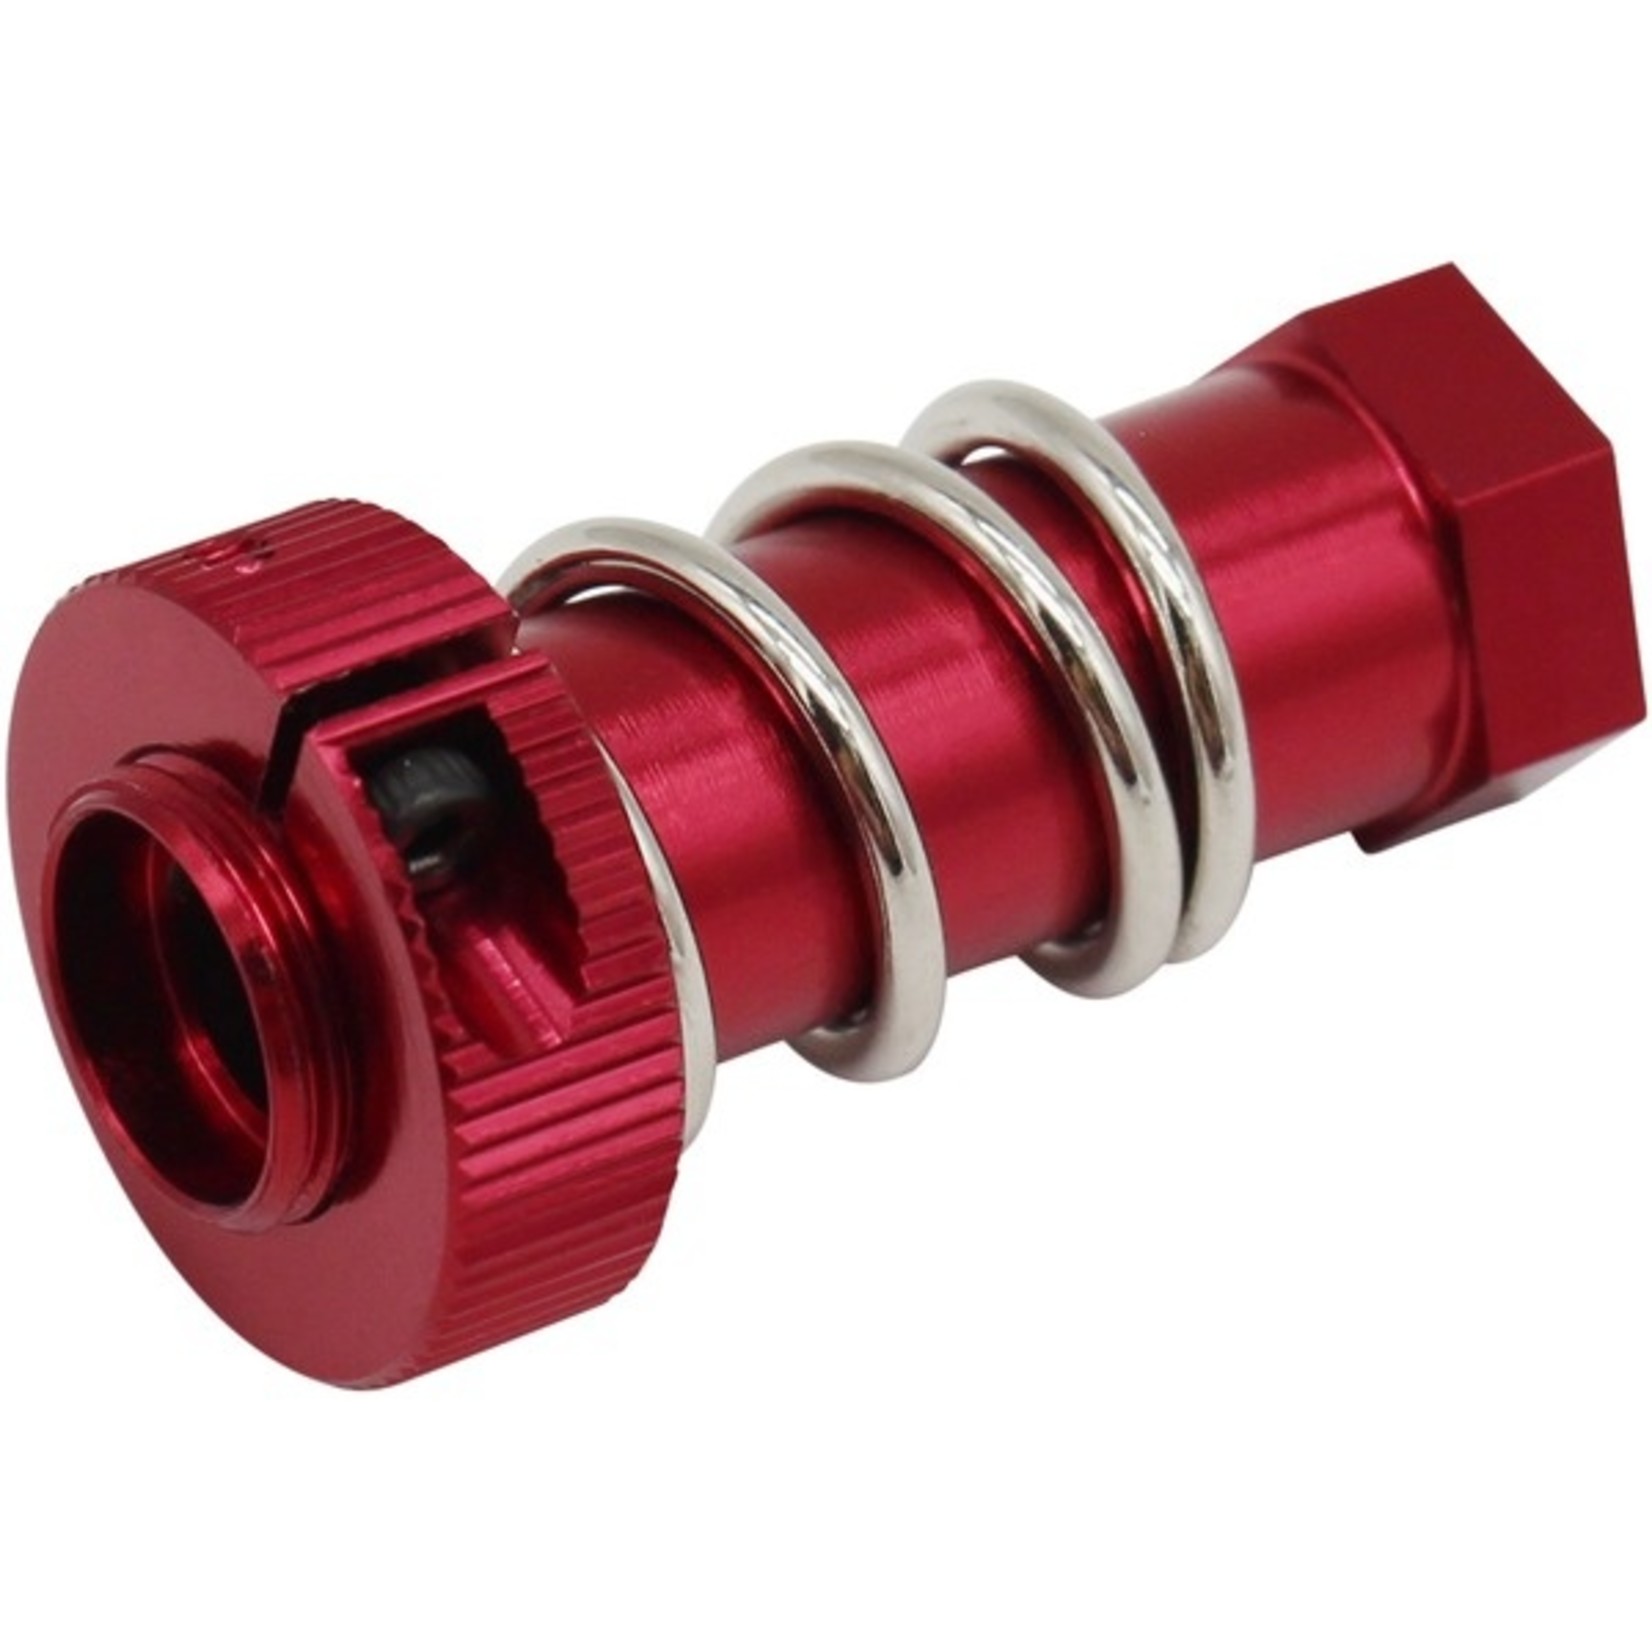 Hot Racing Servo Saver Tube w/ Clamping Nut Set, for 1/8th